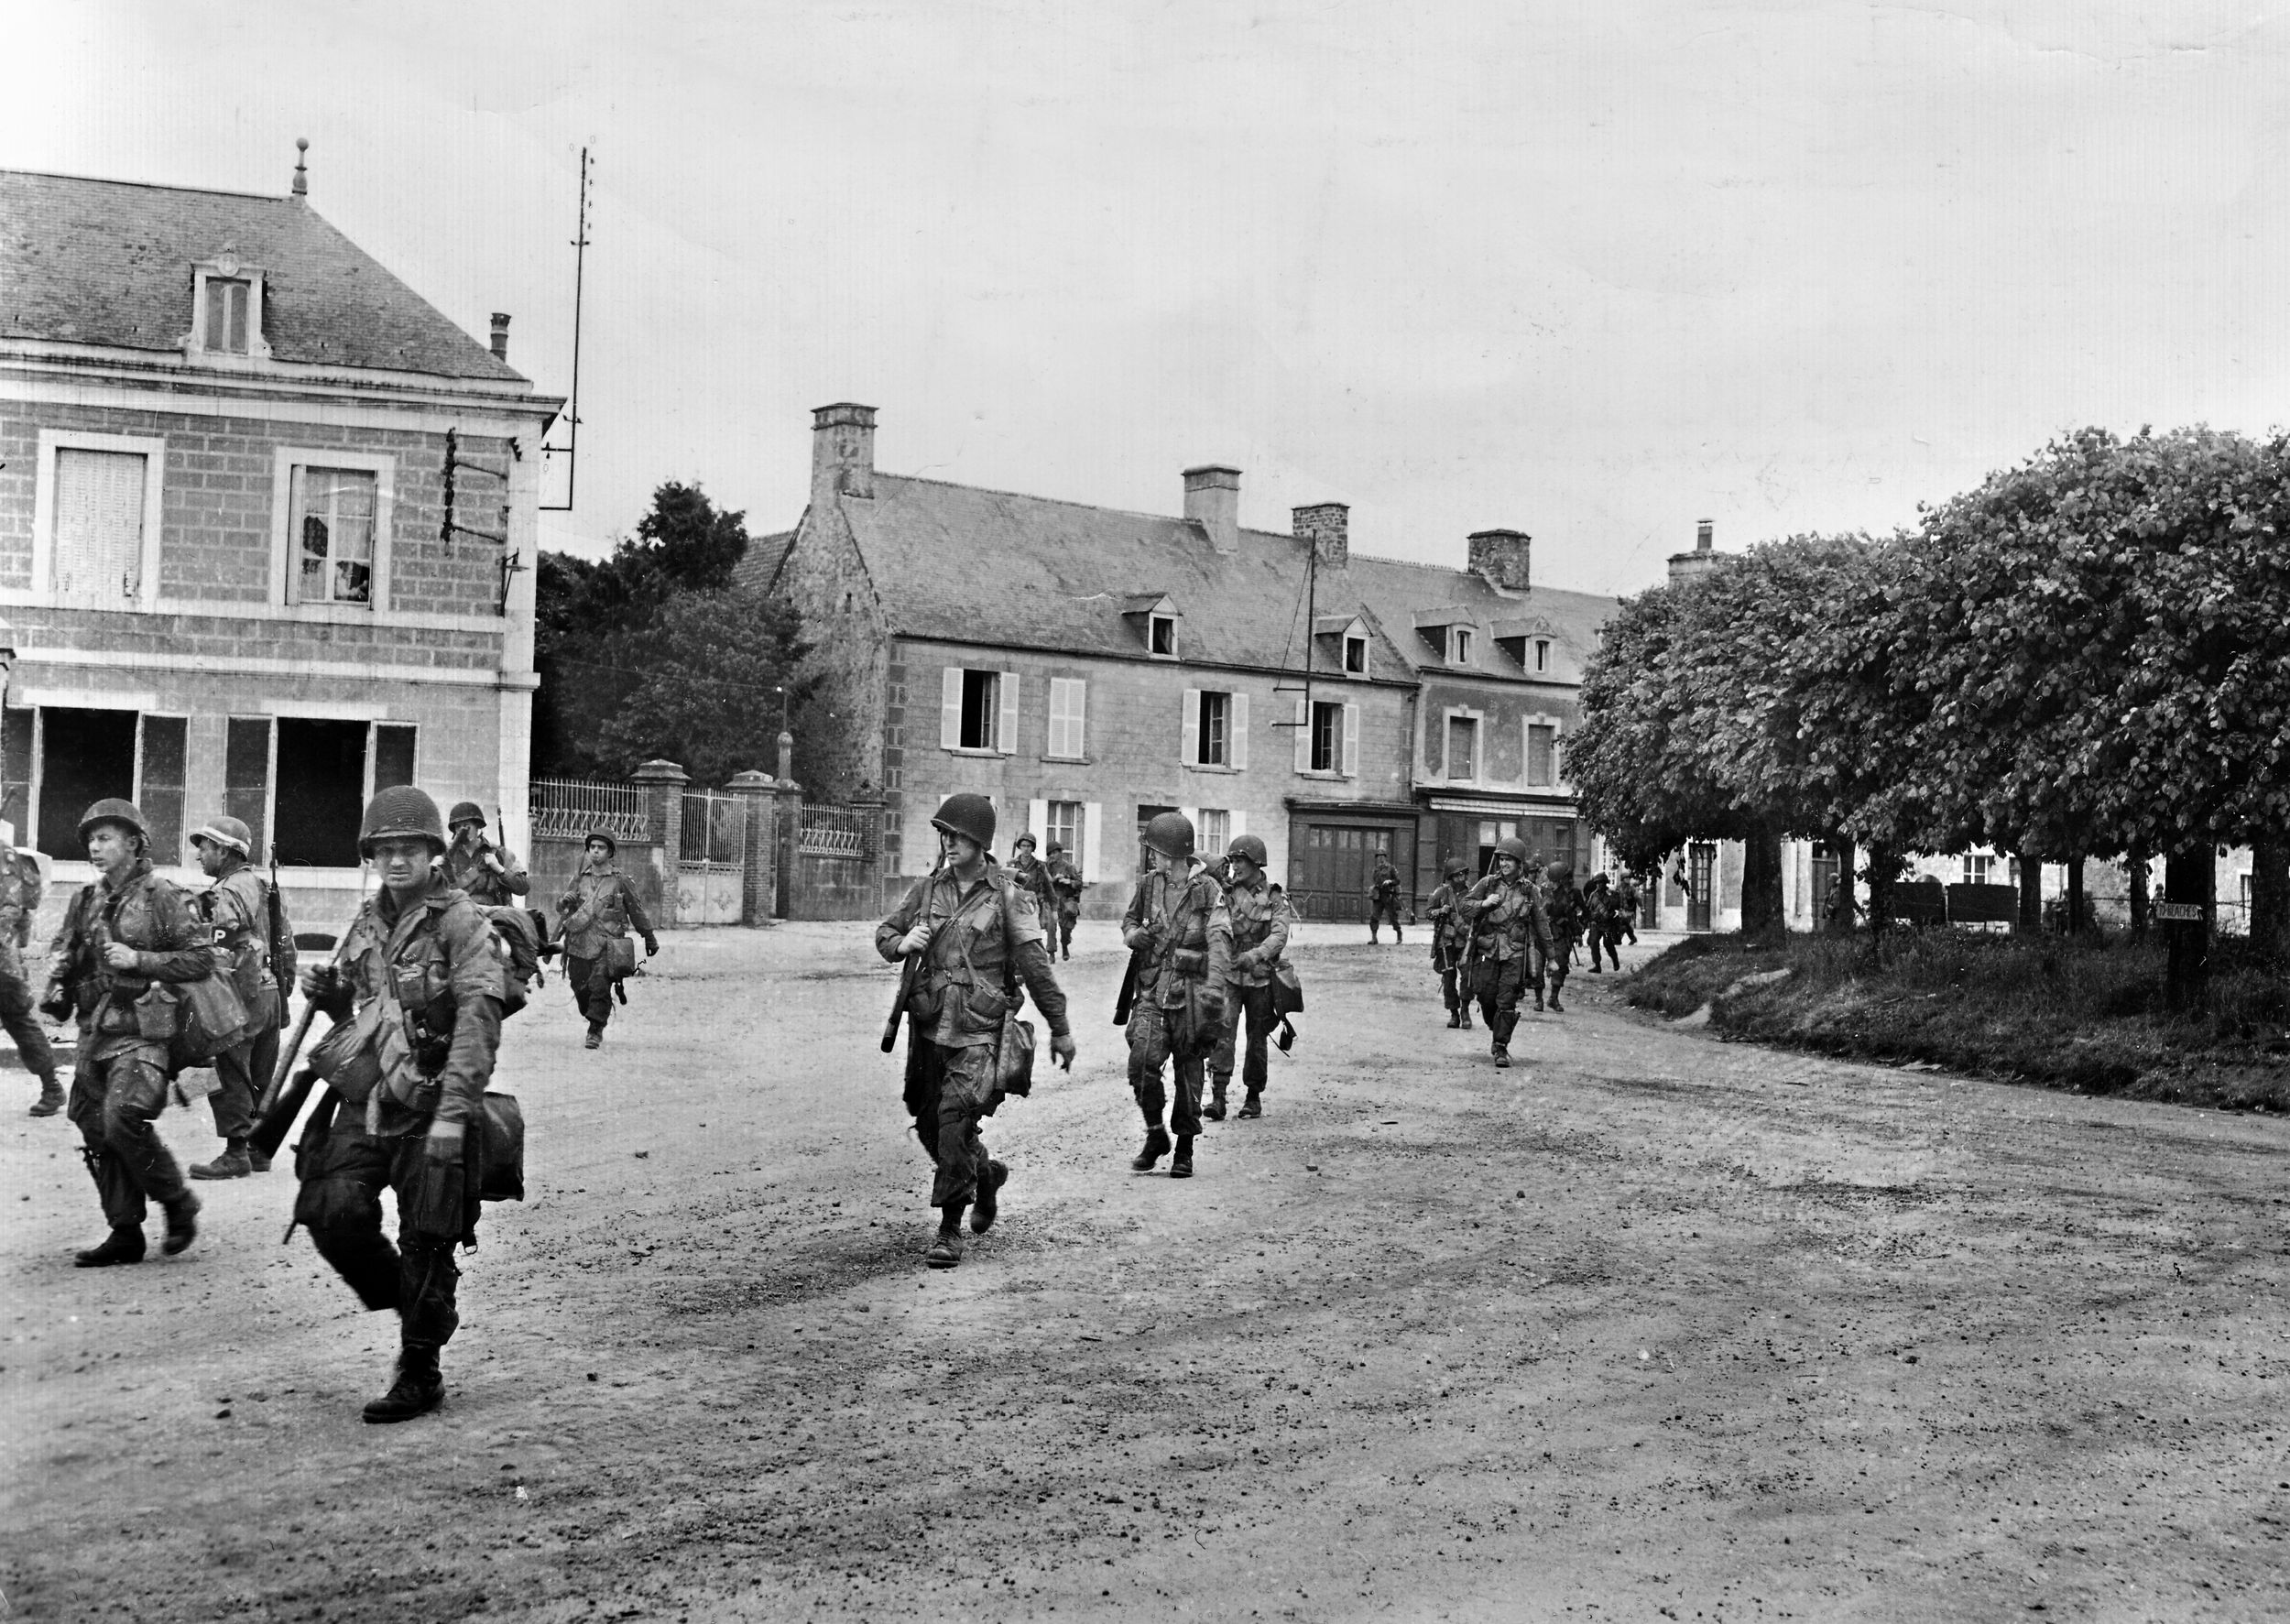 Like American tourists on a sight-seeing trip, members of the 101st Airborne Division casually walk through Sainte-Marie-du-Mont on their way to engage in battle Carentan.